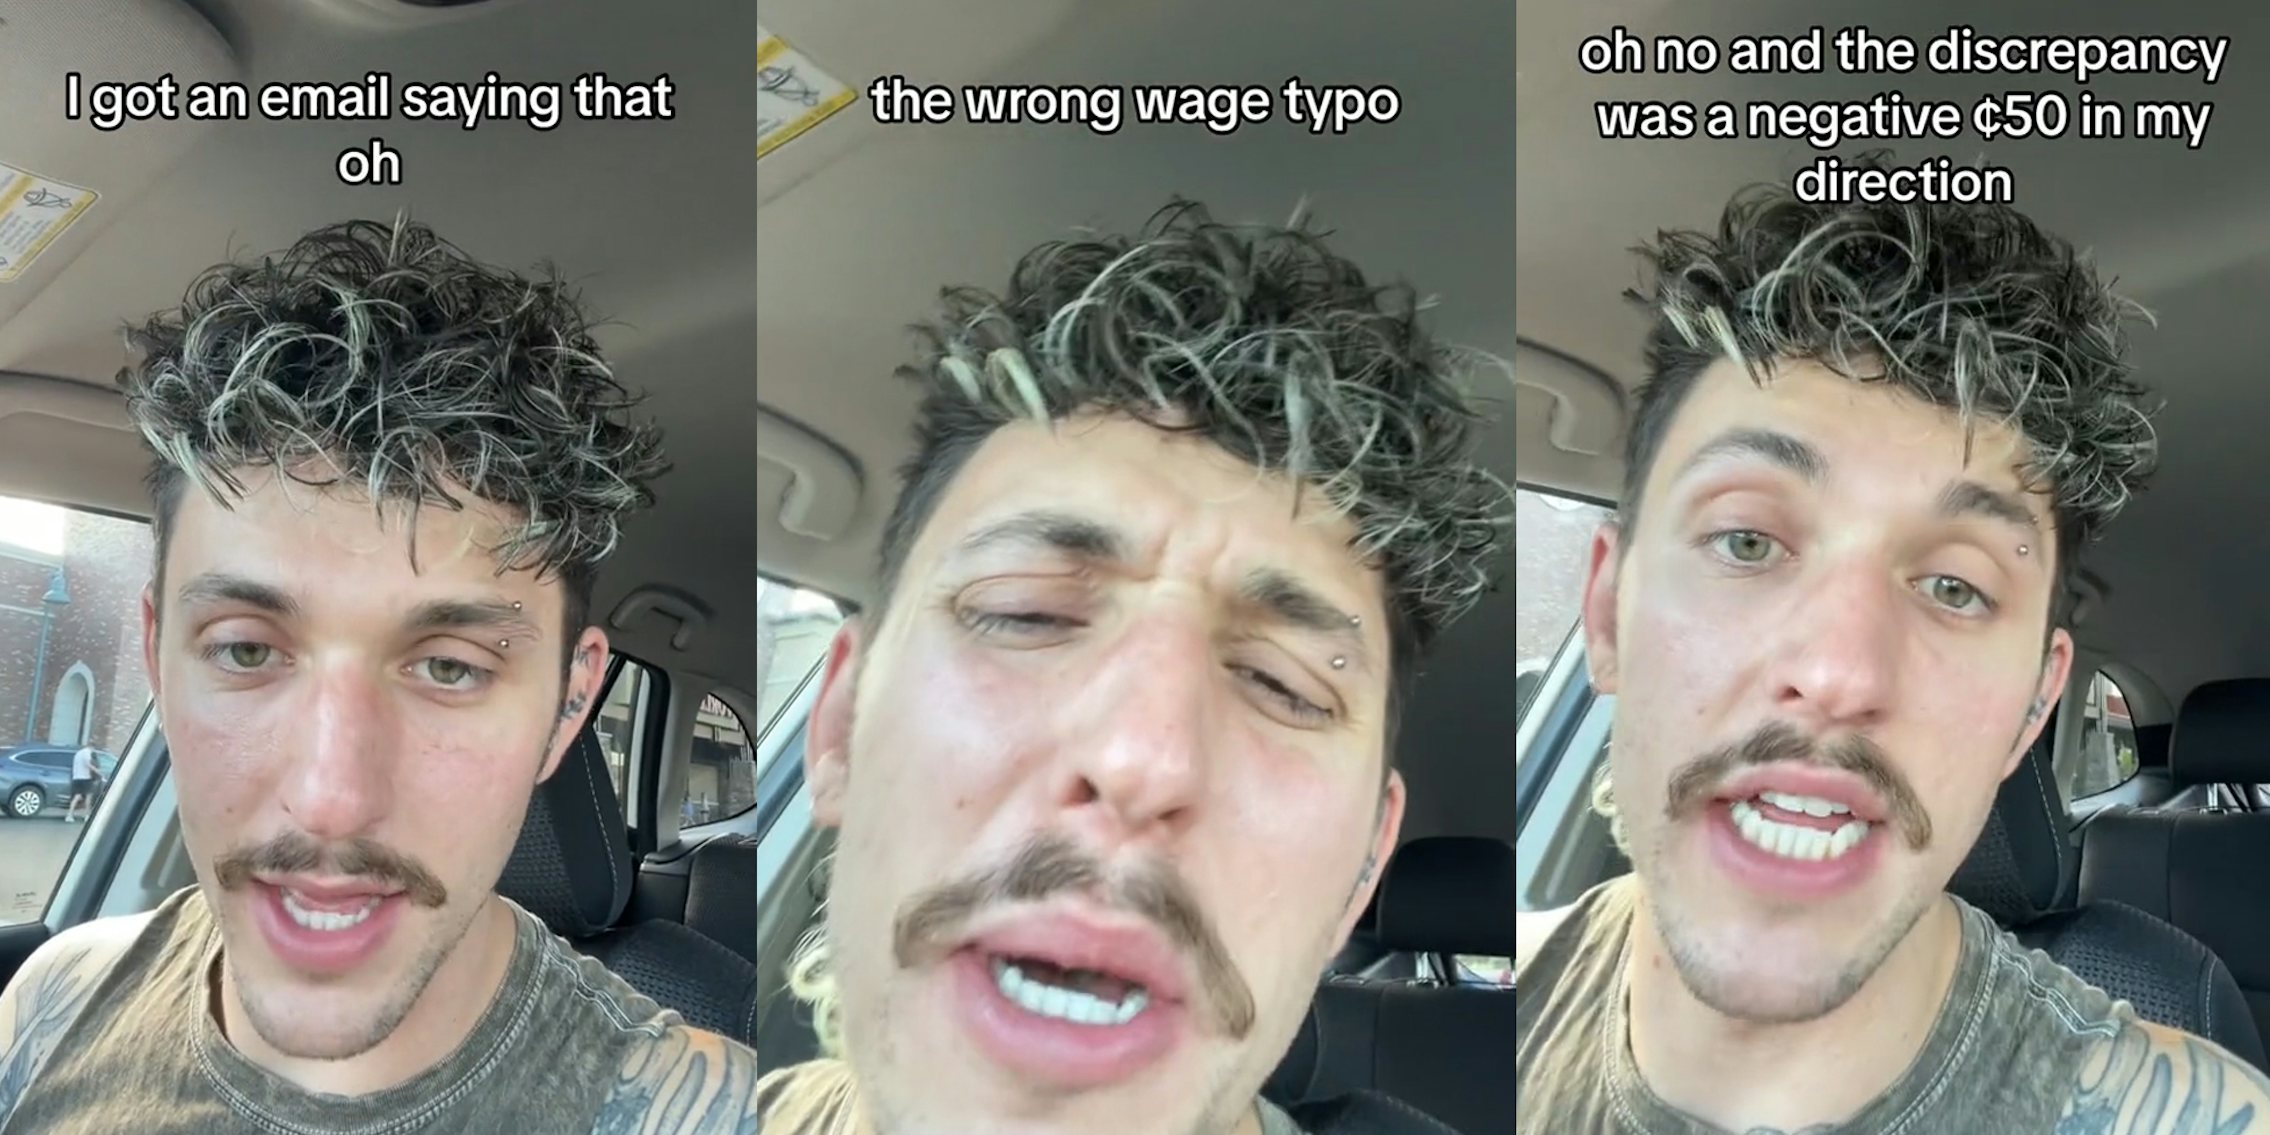 worker speaking in car with caption 'I got an email saying oh' (l) worker speaking in car with caption 'the wrong wage typo' (c) worker speaking in car with caption 'oh no and the discrepancy was a negative 50 cents in my direction' (r)